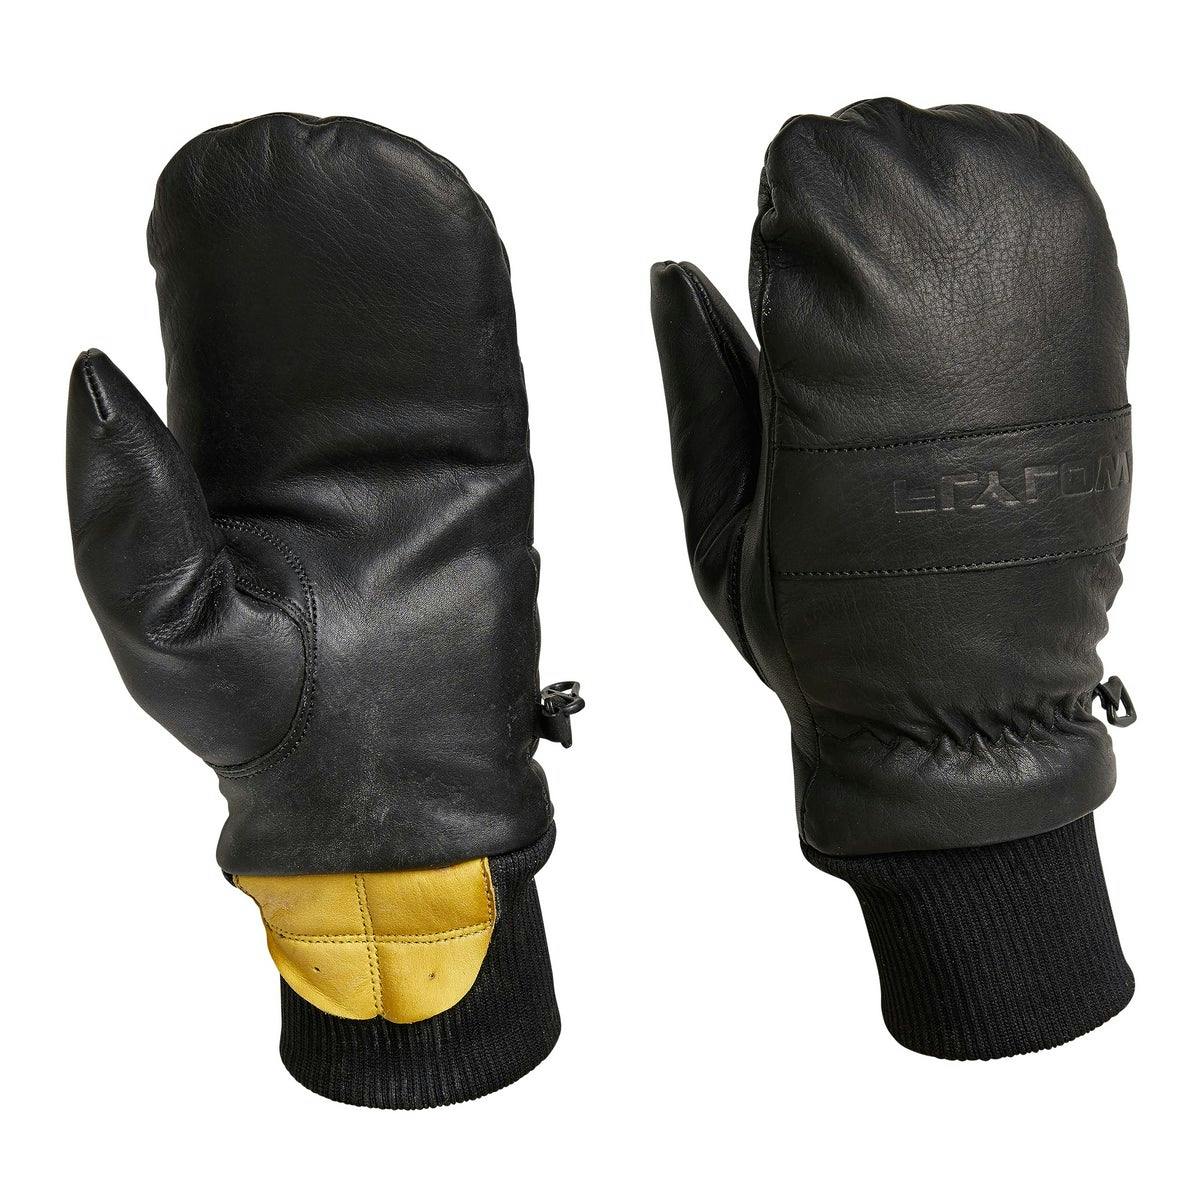 Flylow Oven Insulated Mittens